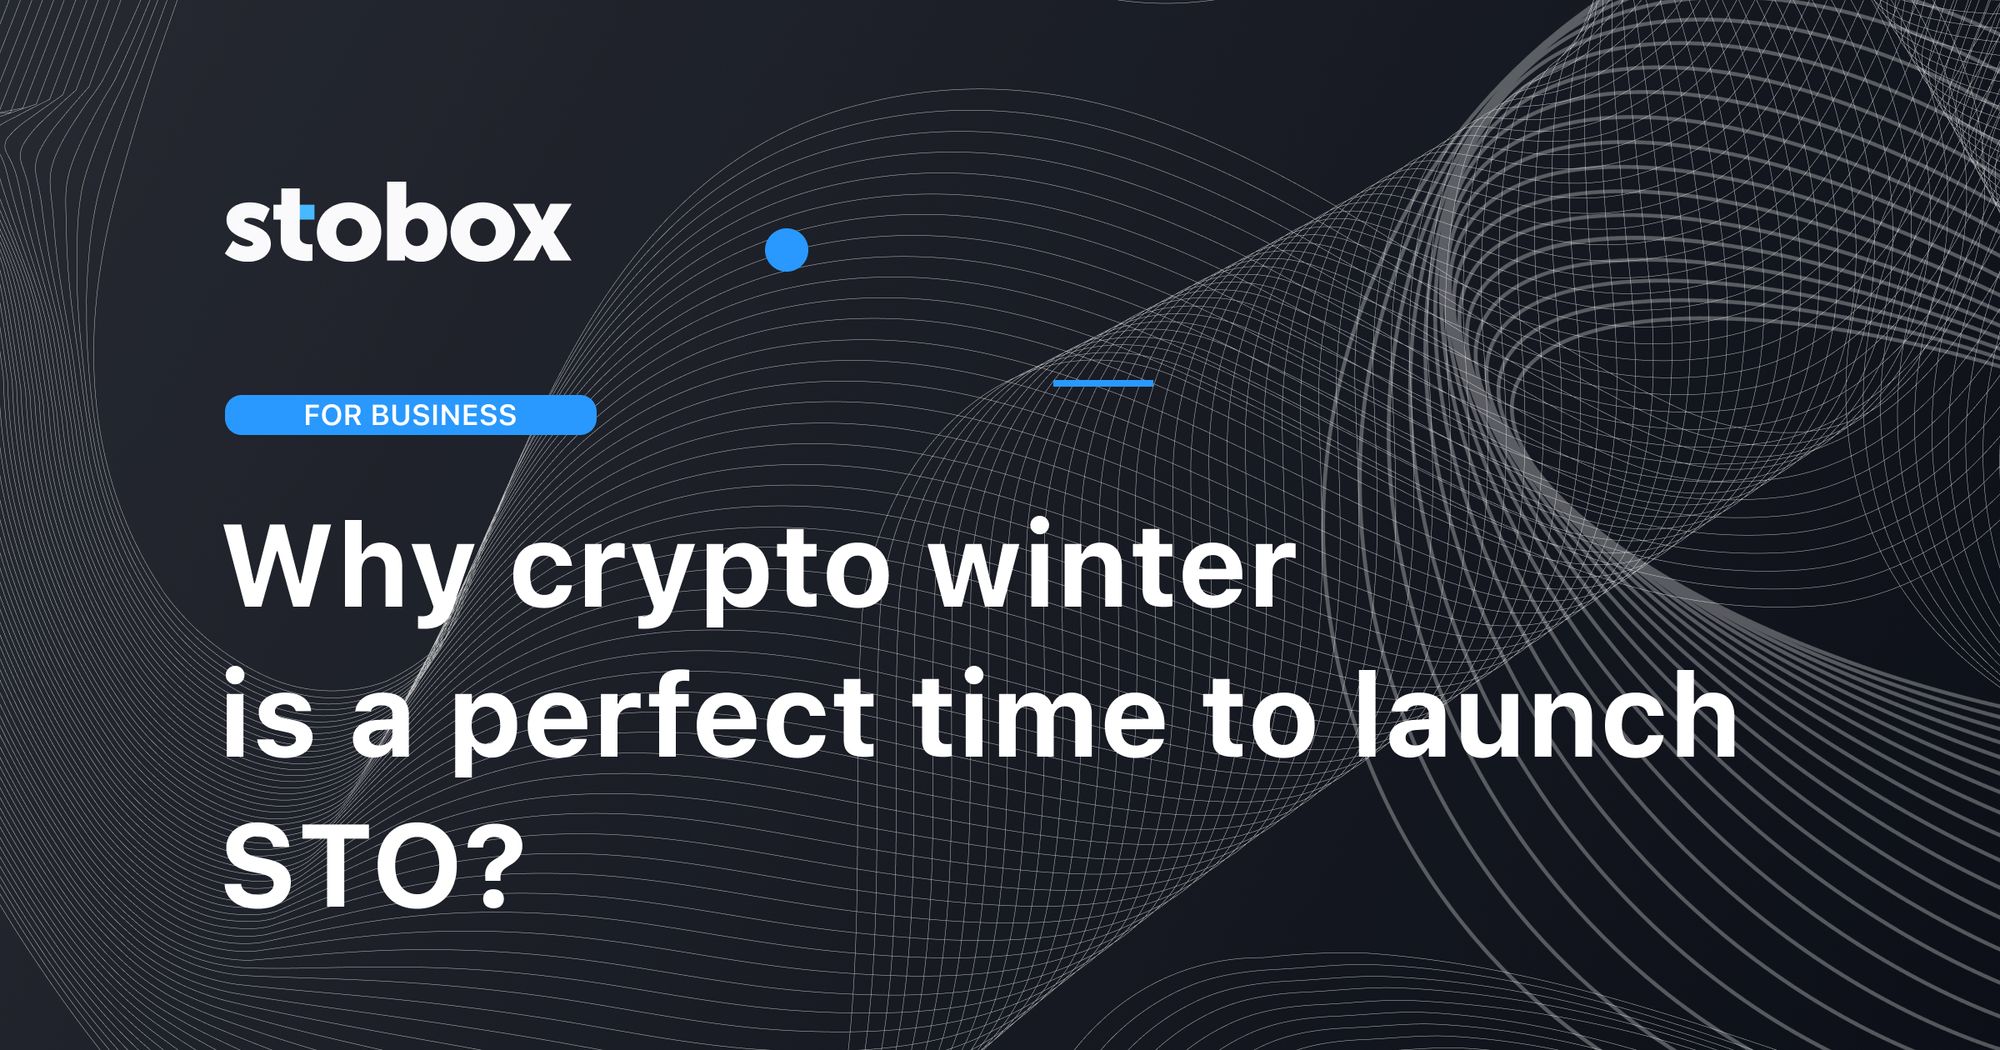 Why are crypto winter and financial crisis a perfect time to launch STO?